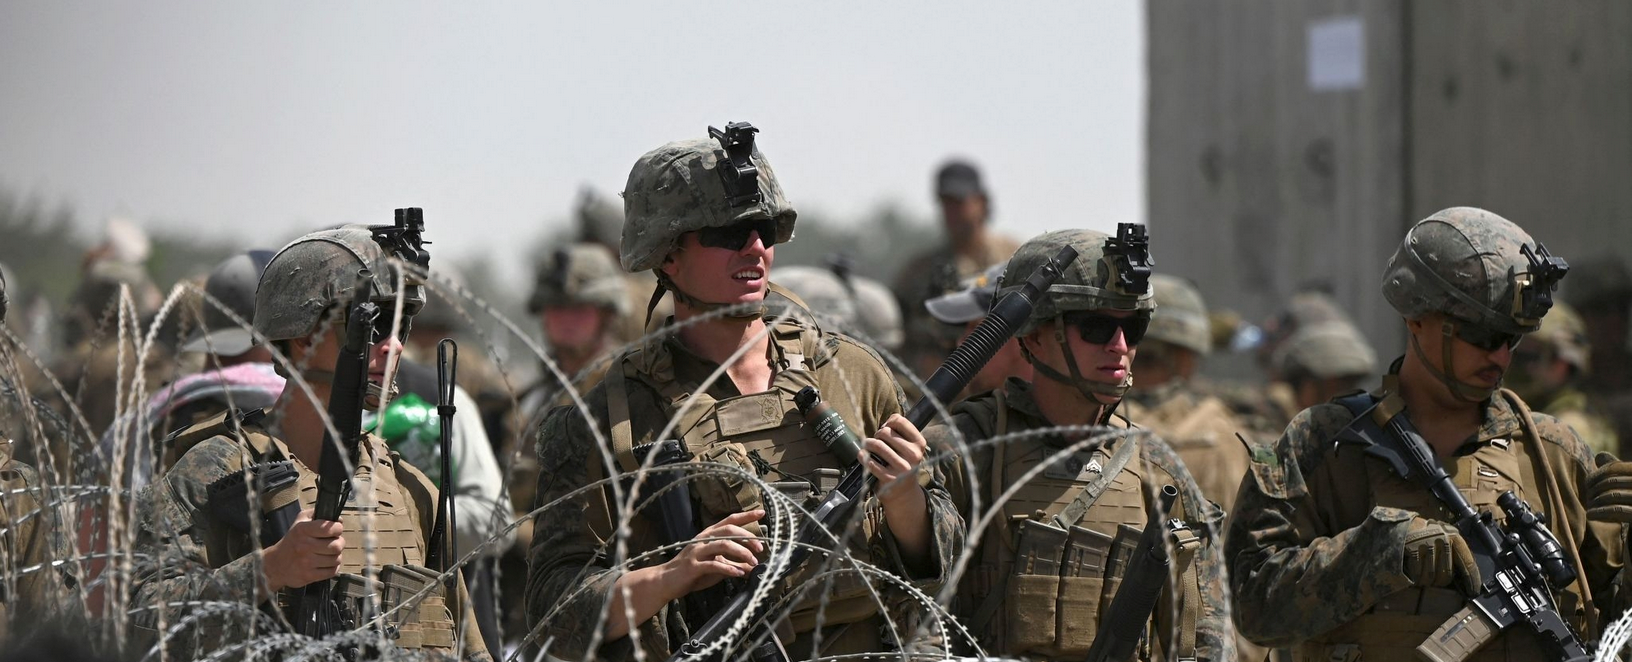 U.S. soldiers assisting with evacuation of Afghanistan